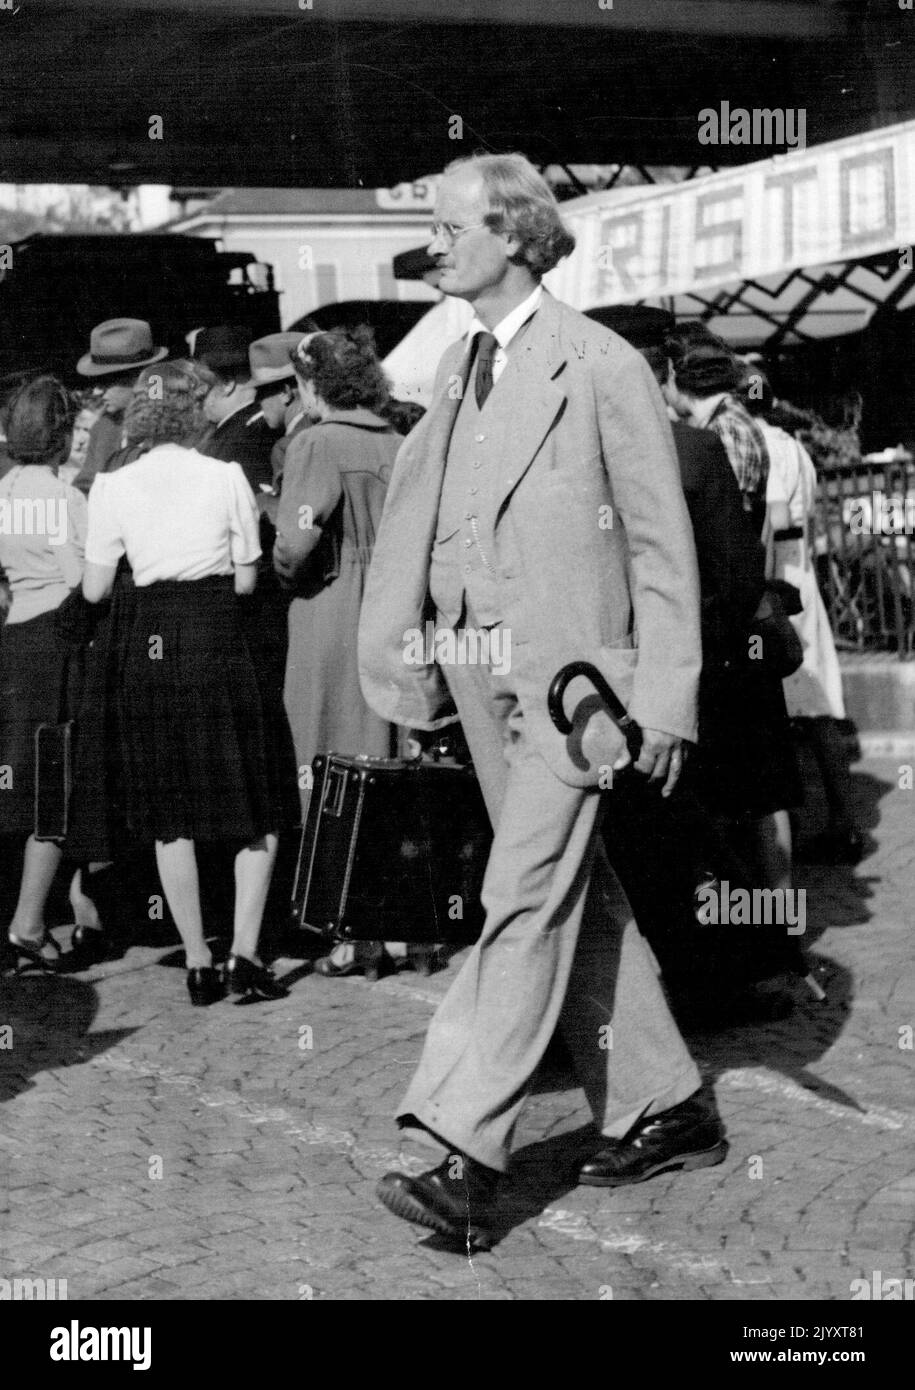 Professor Piccard, the famous stratmosphere flier visits Switzerland as a holiday guest in Locarno. He will proceed shortly to Mexico where he intends to carry out his next scientific experiments in the higher stratas. December 28, 1940. (Photo by Photopress). Stock Photo